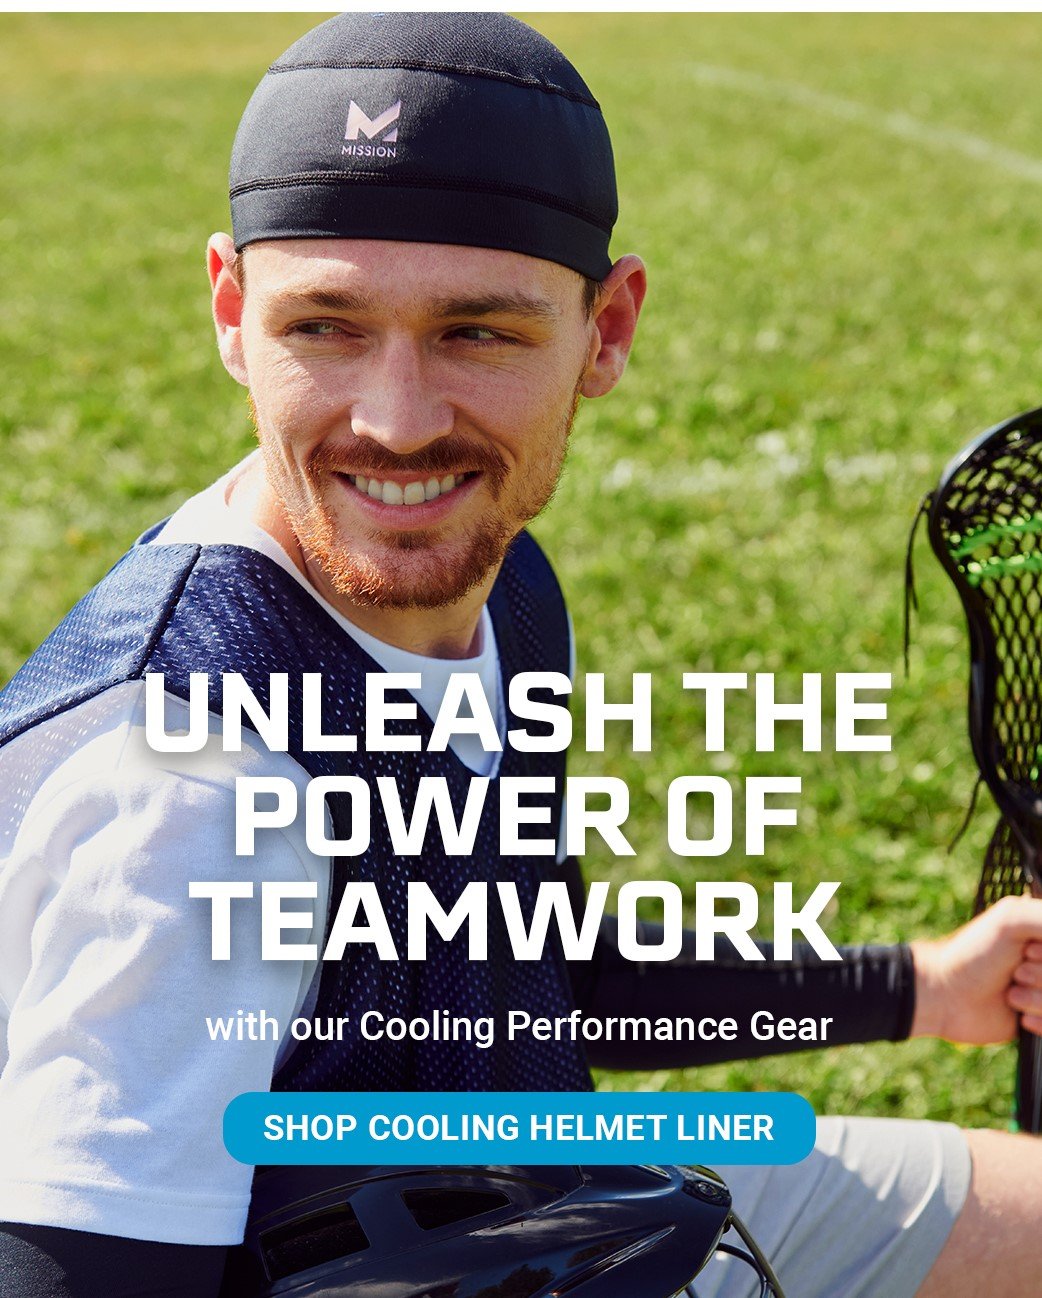 UNLEASH THE POWER OF TEAMWORK with our Cooling Performance Gear [ SHOP COOLING HELMET LINER]